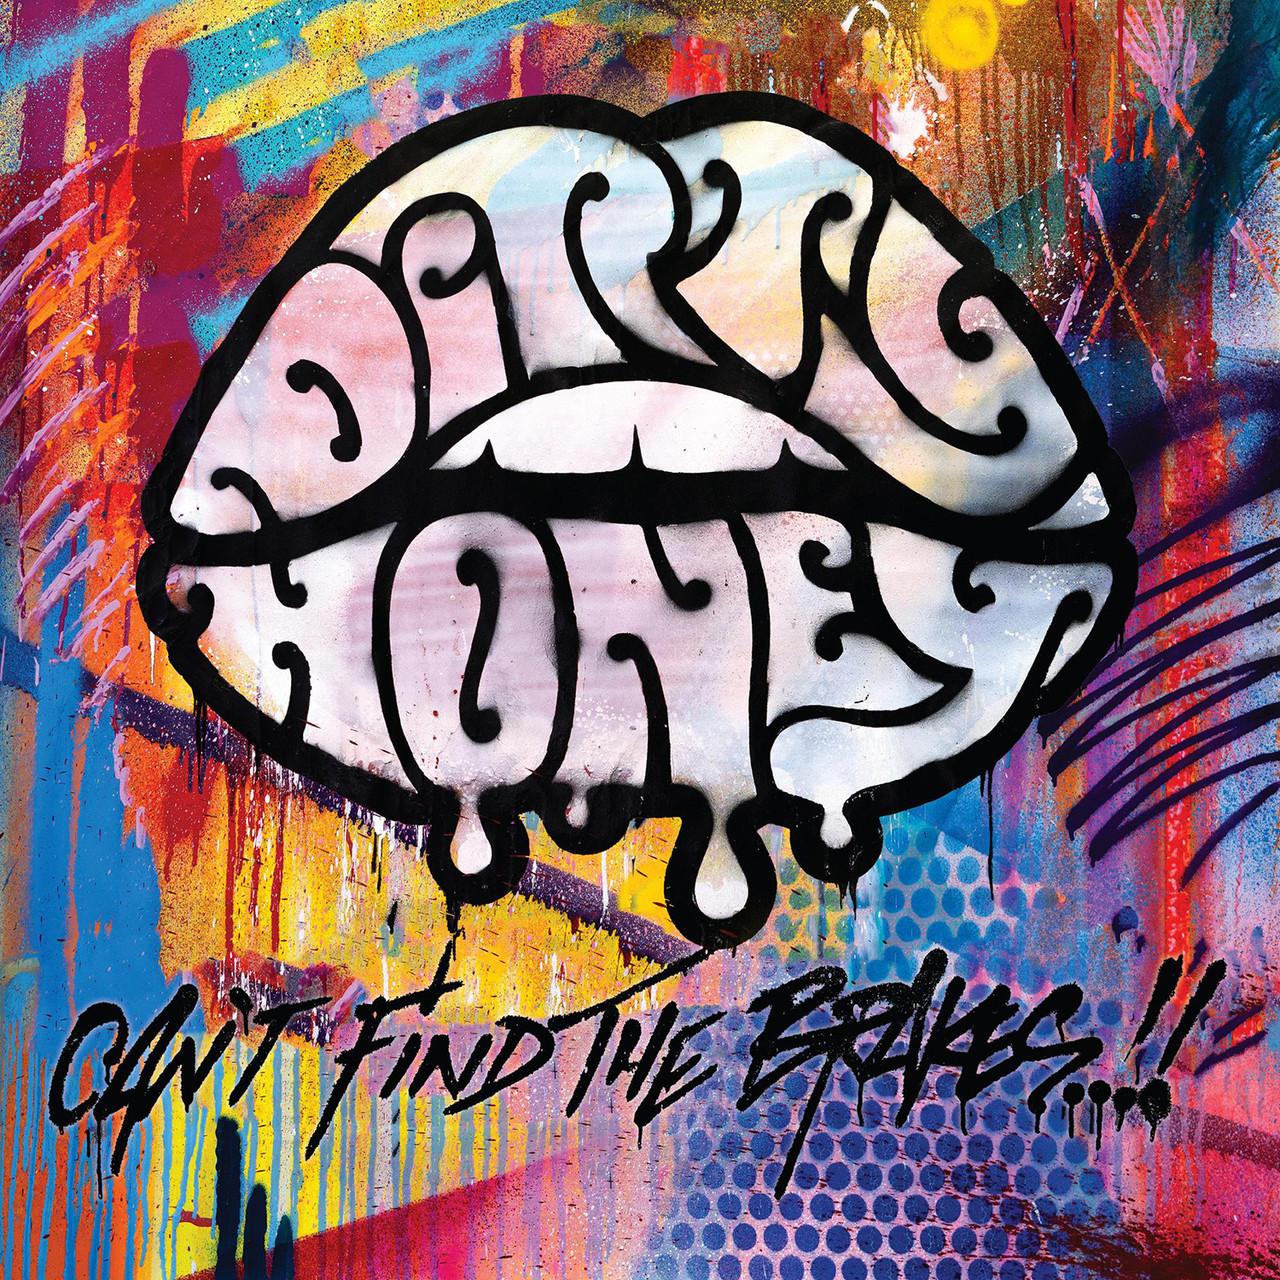 Dirty Honey ‘Can’t Find the Brakes’ album artwork